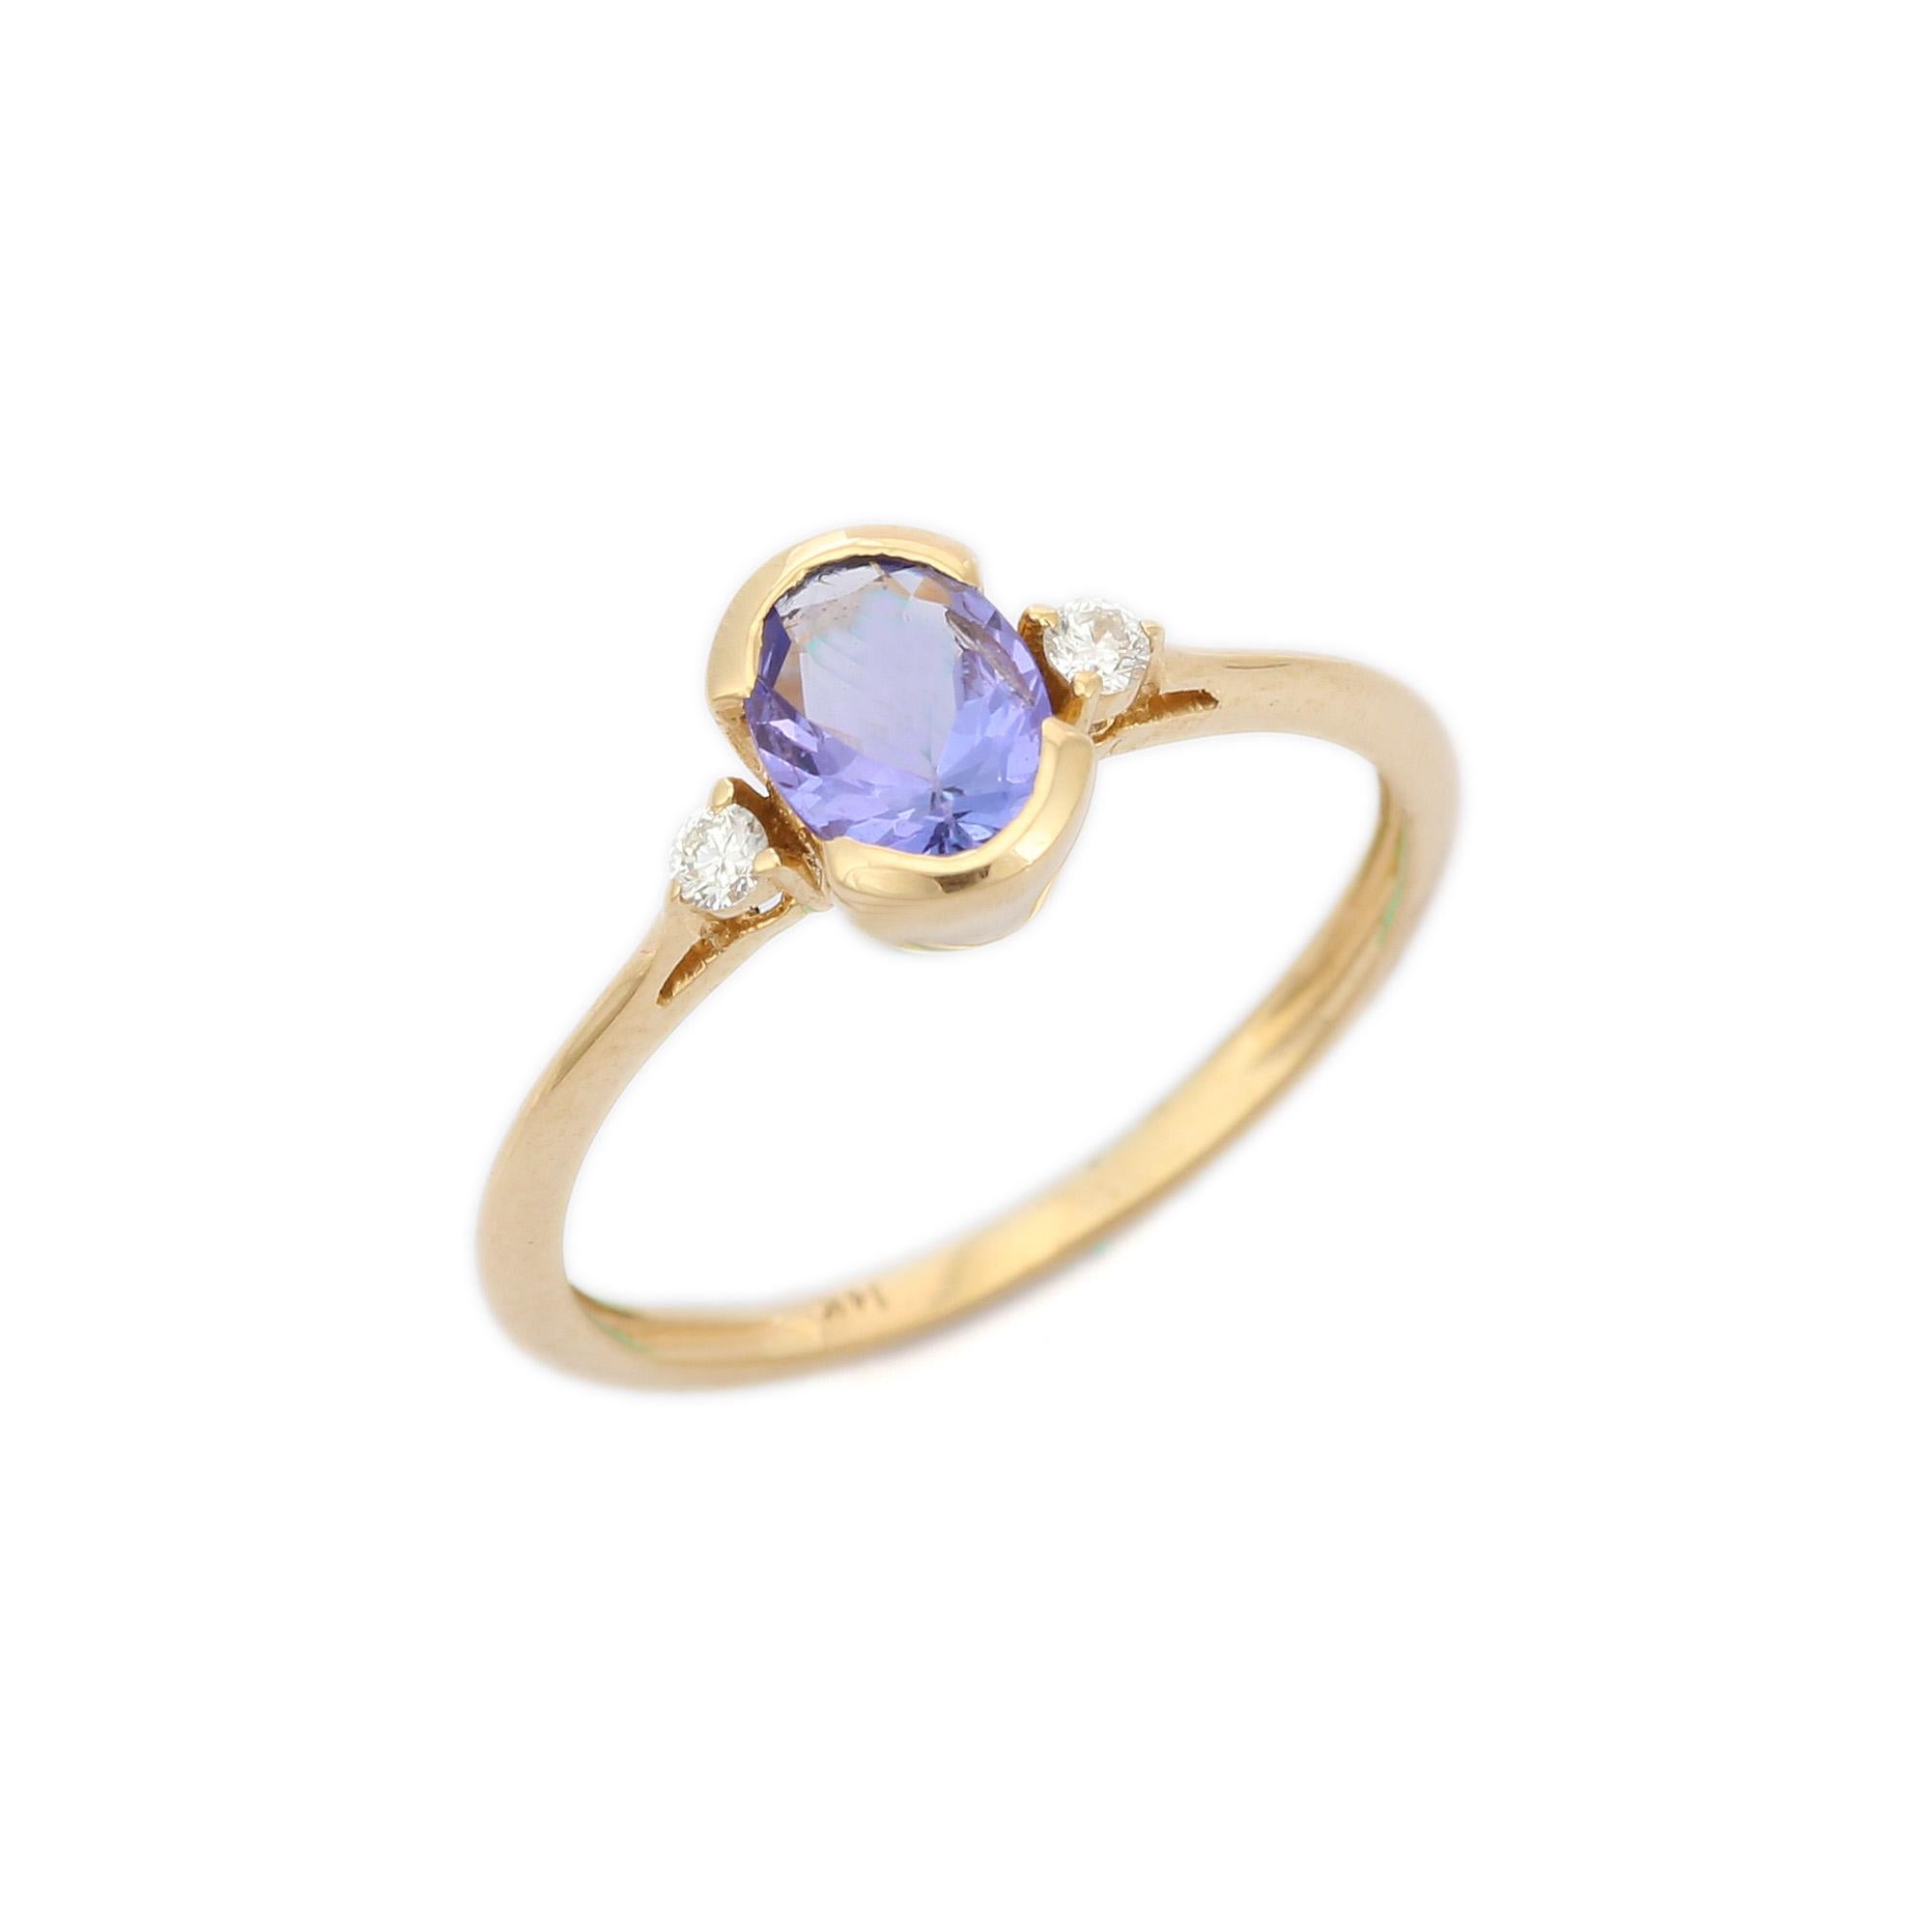 For Sale:  Certified 0.8 Carat Tanzanite and Diamond Dainty Ring in 14K Yellow Gold 4